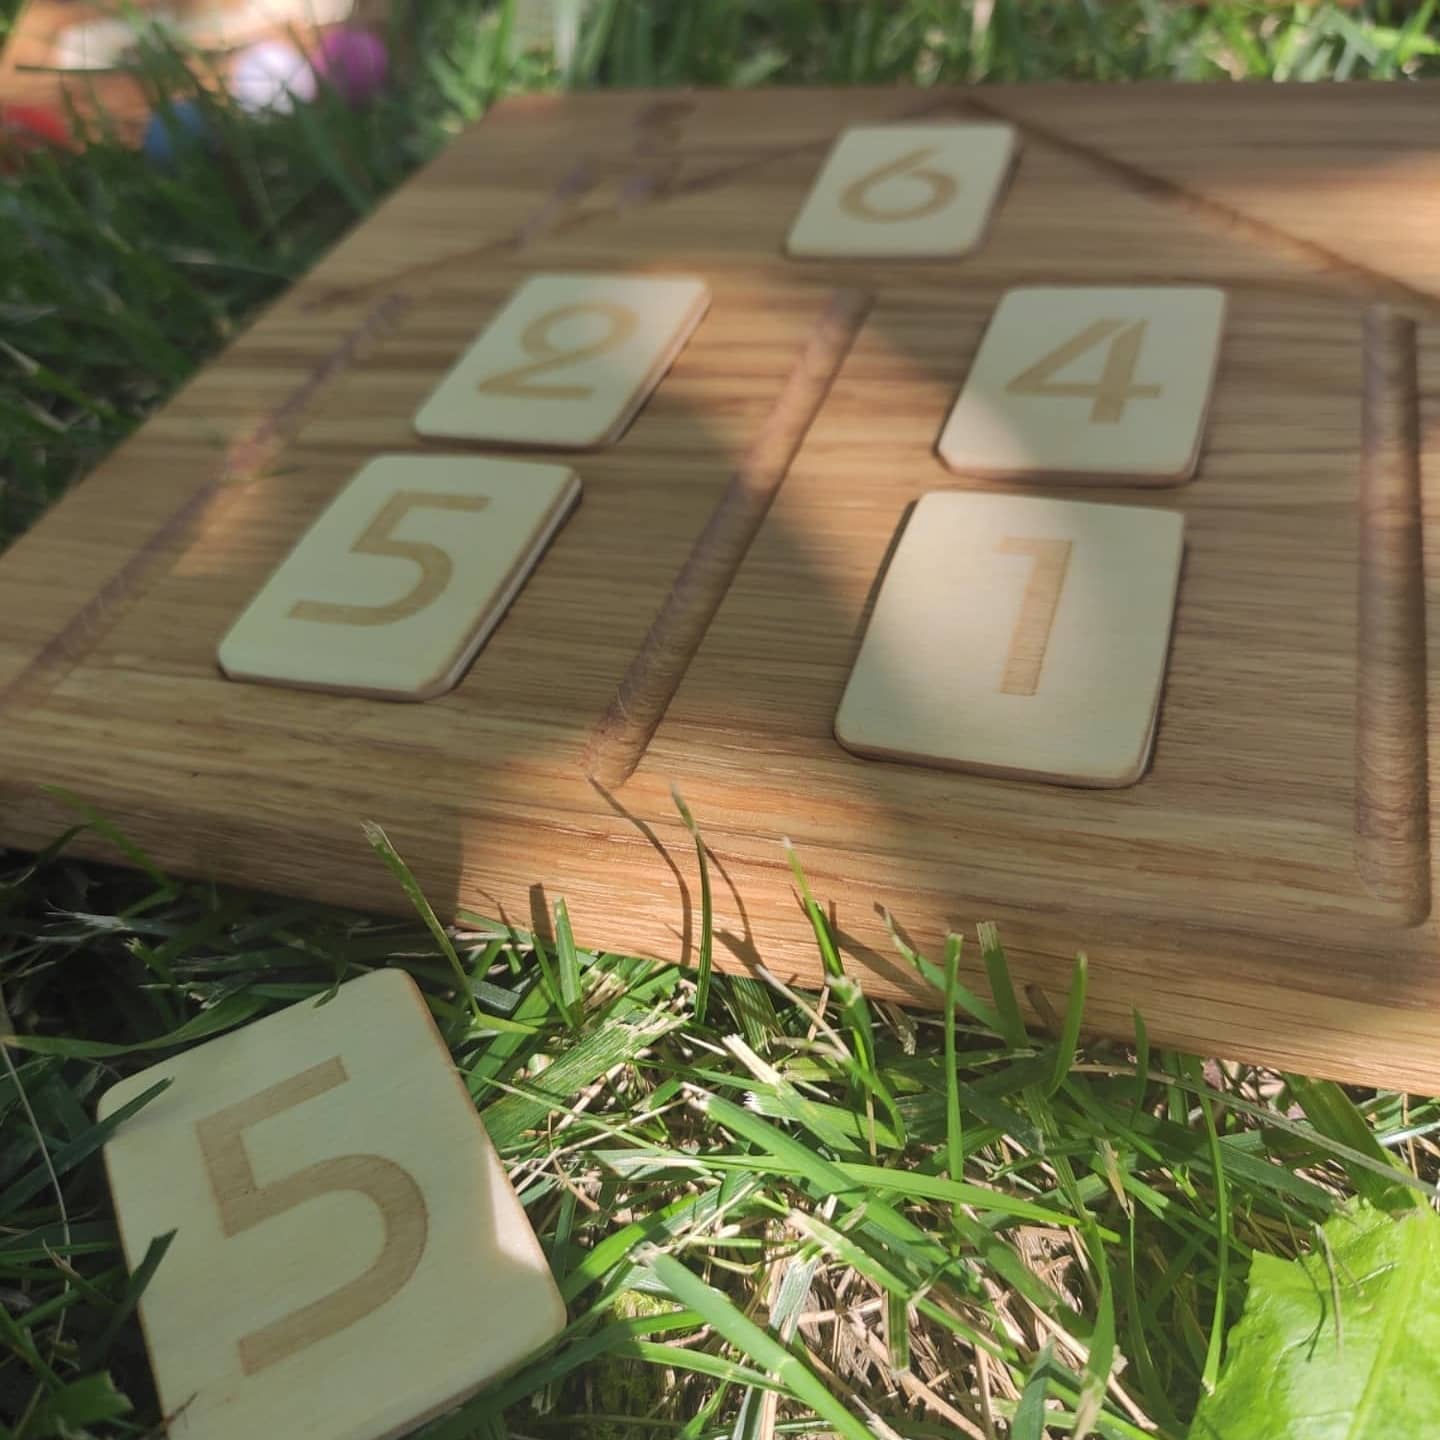 House Math board with set of numbers cards